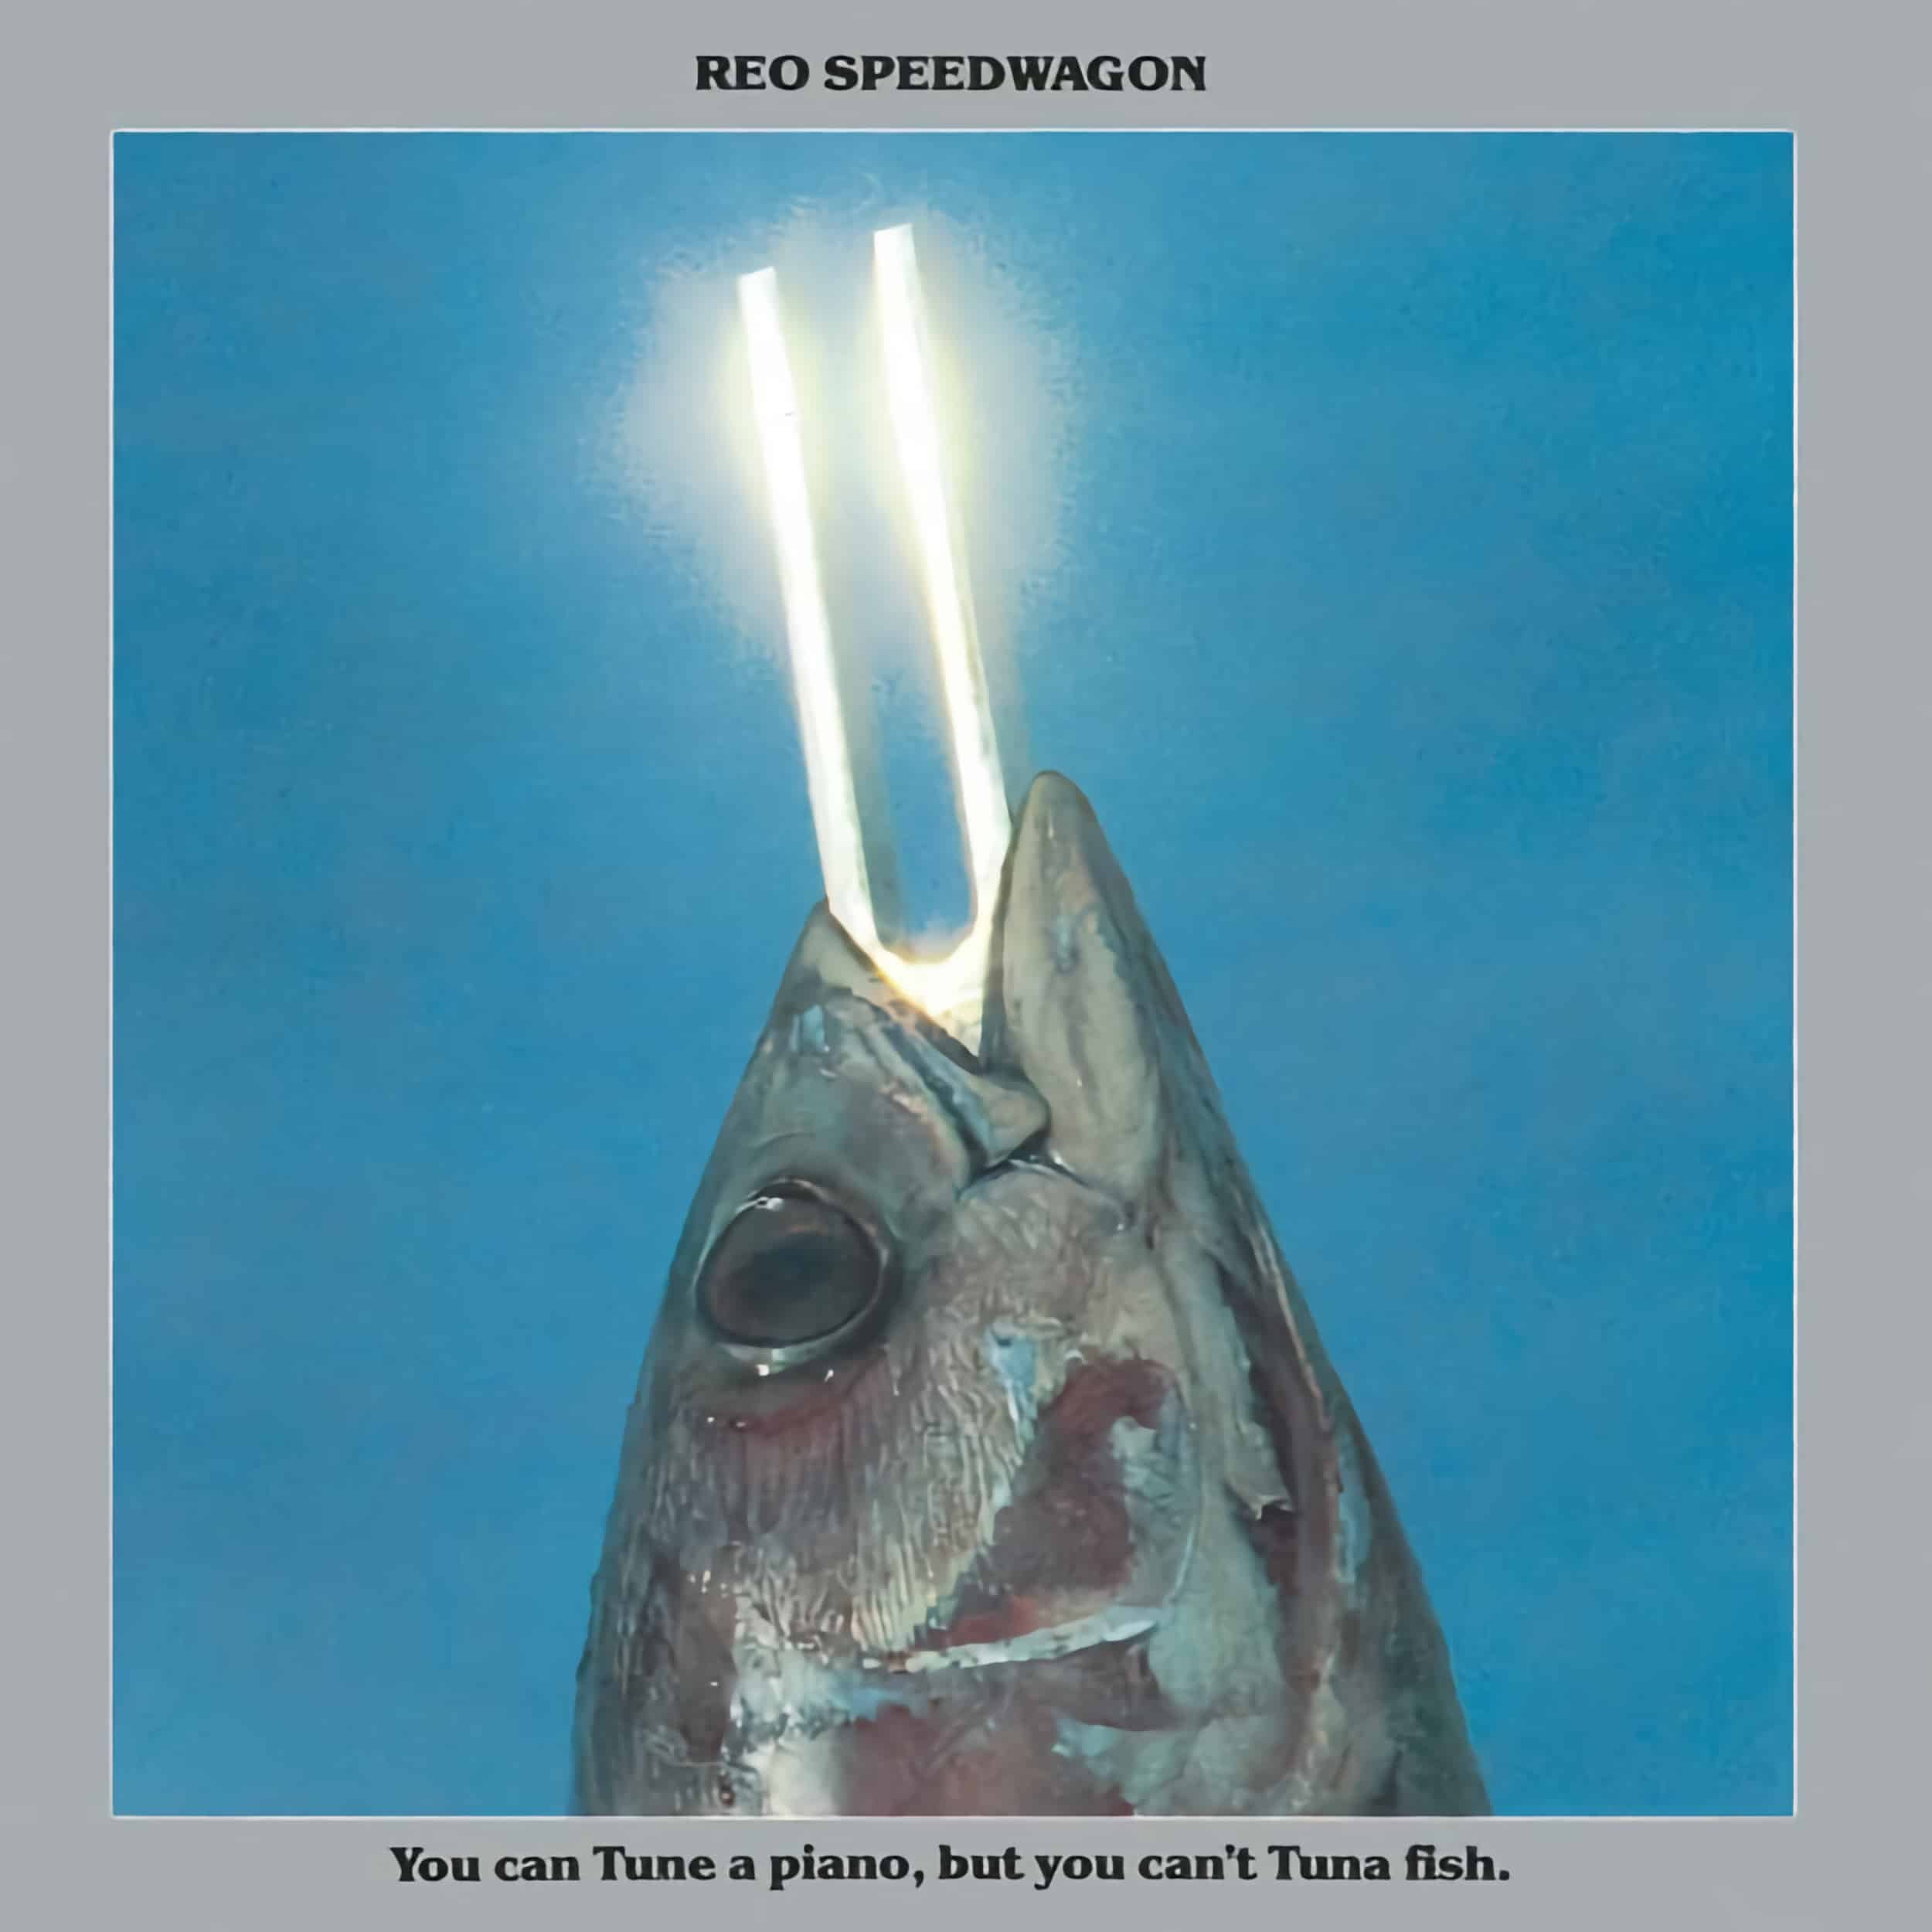 REO Speedwagon – You Can Tune A Piano, But You Can’t Tuna Fish